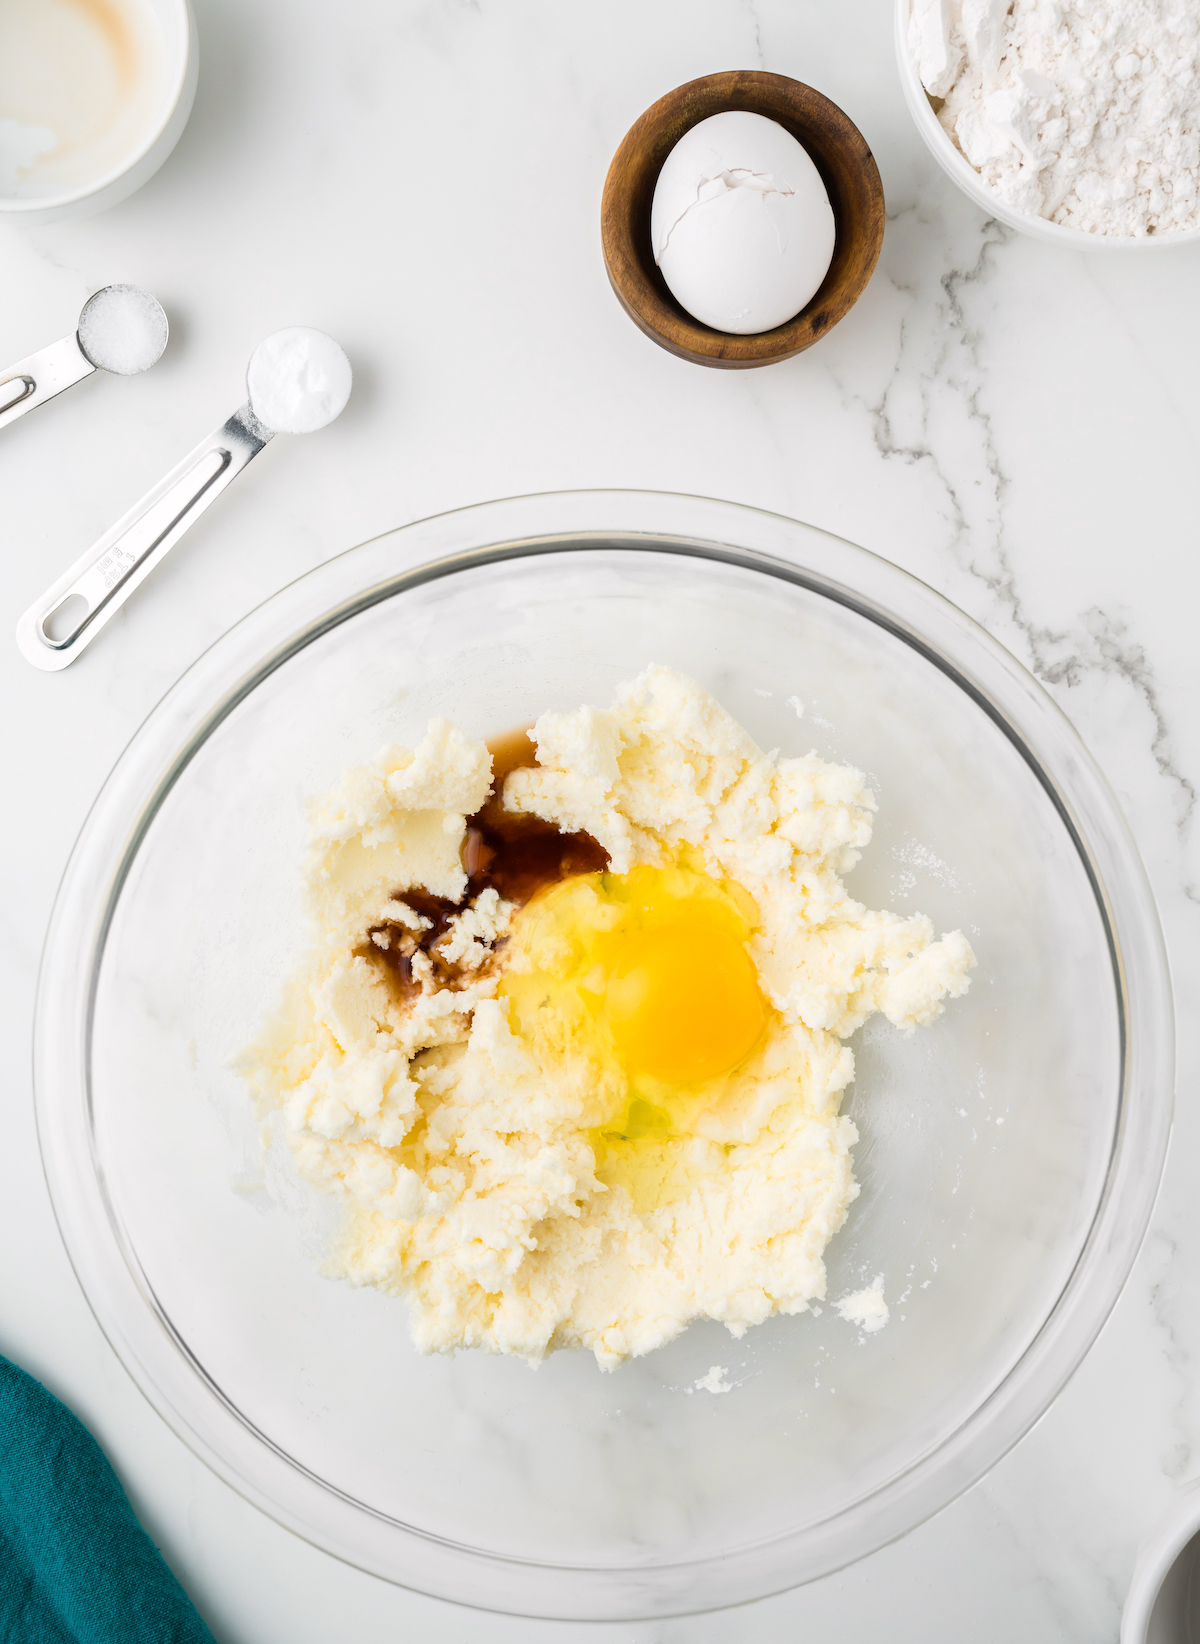 Egg and vanilla added to butter and sugar in a clear glass bowl